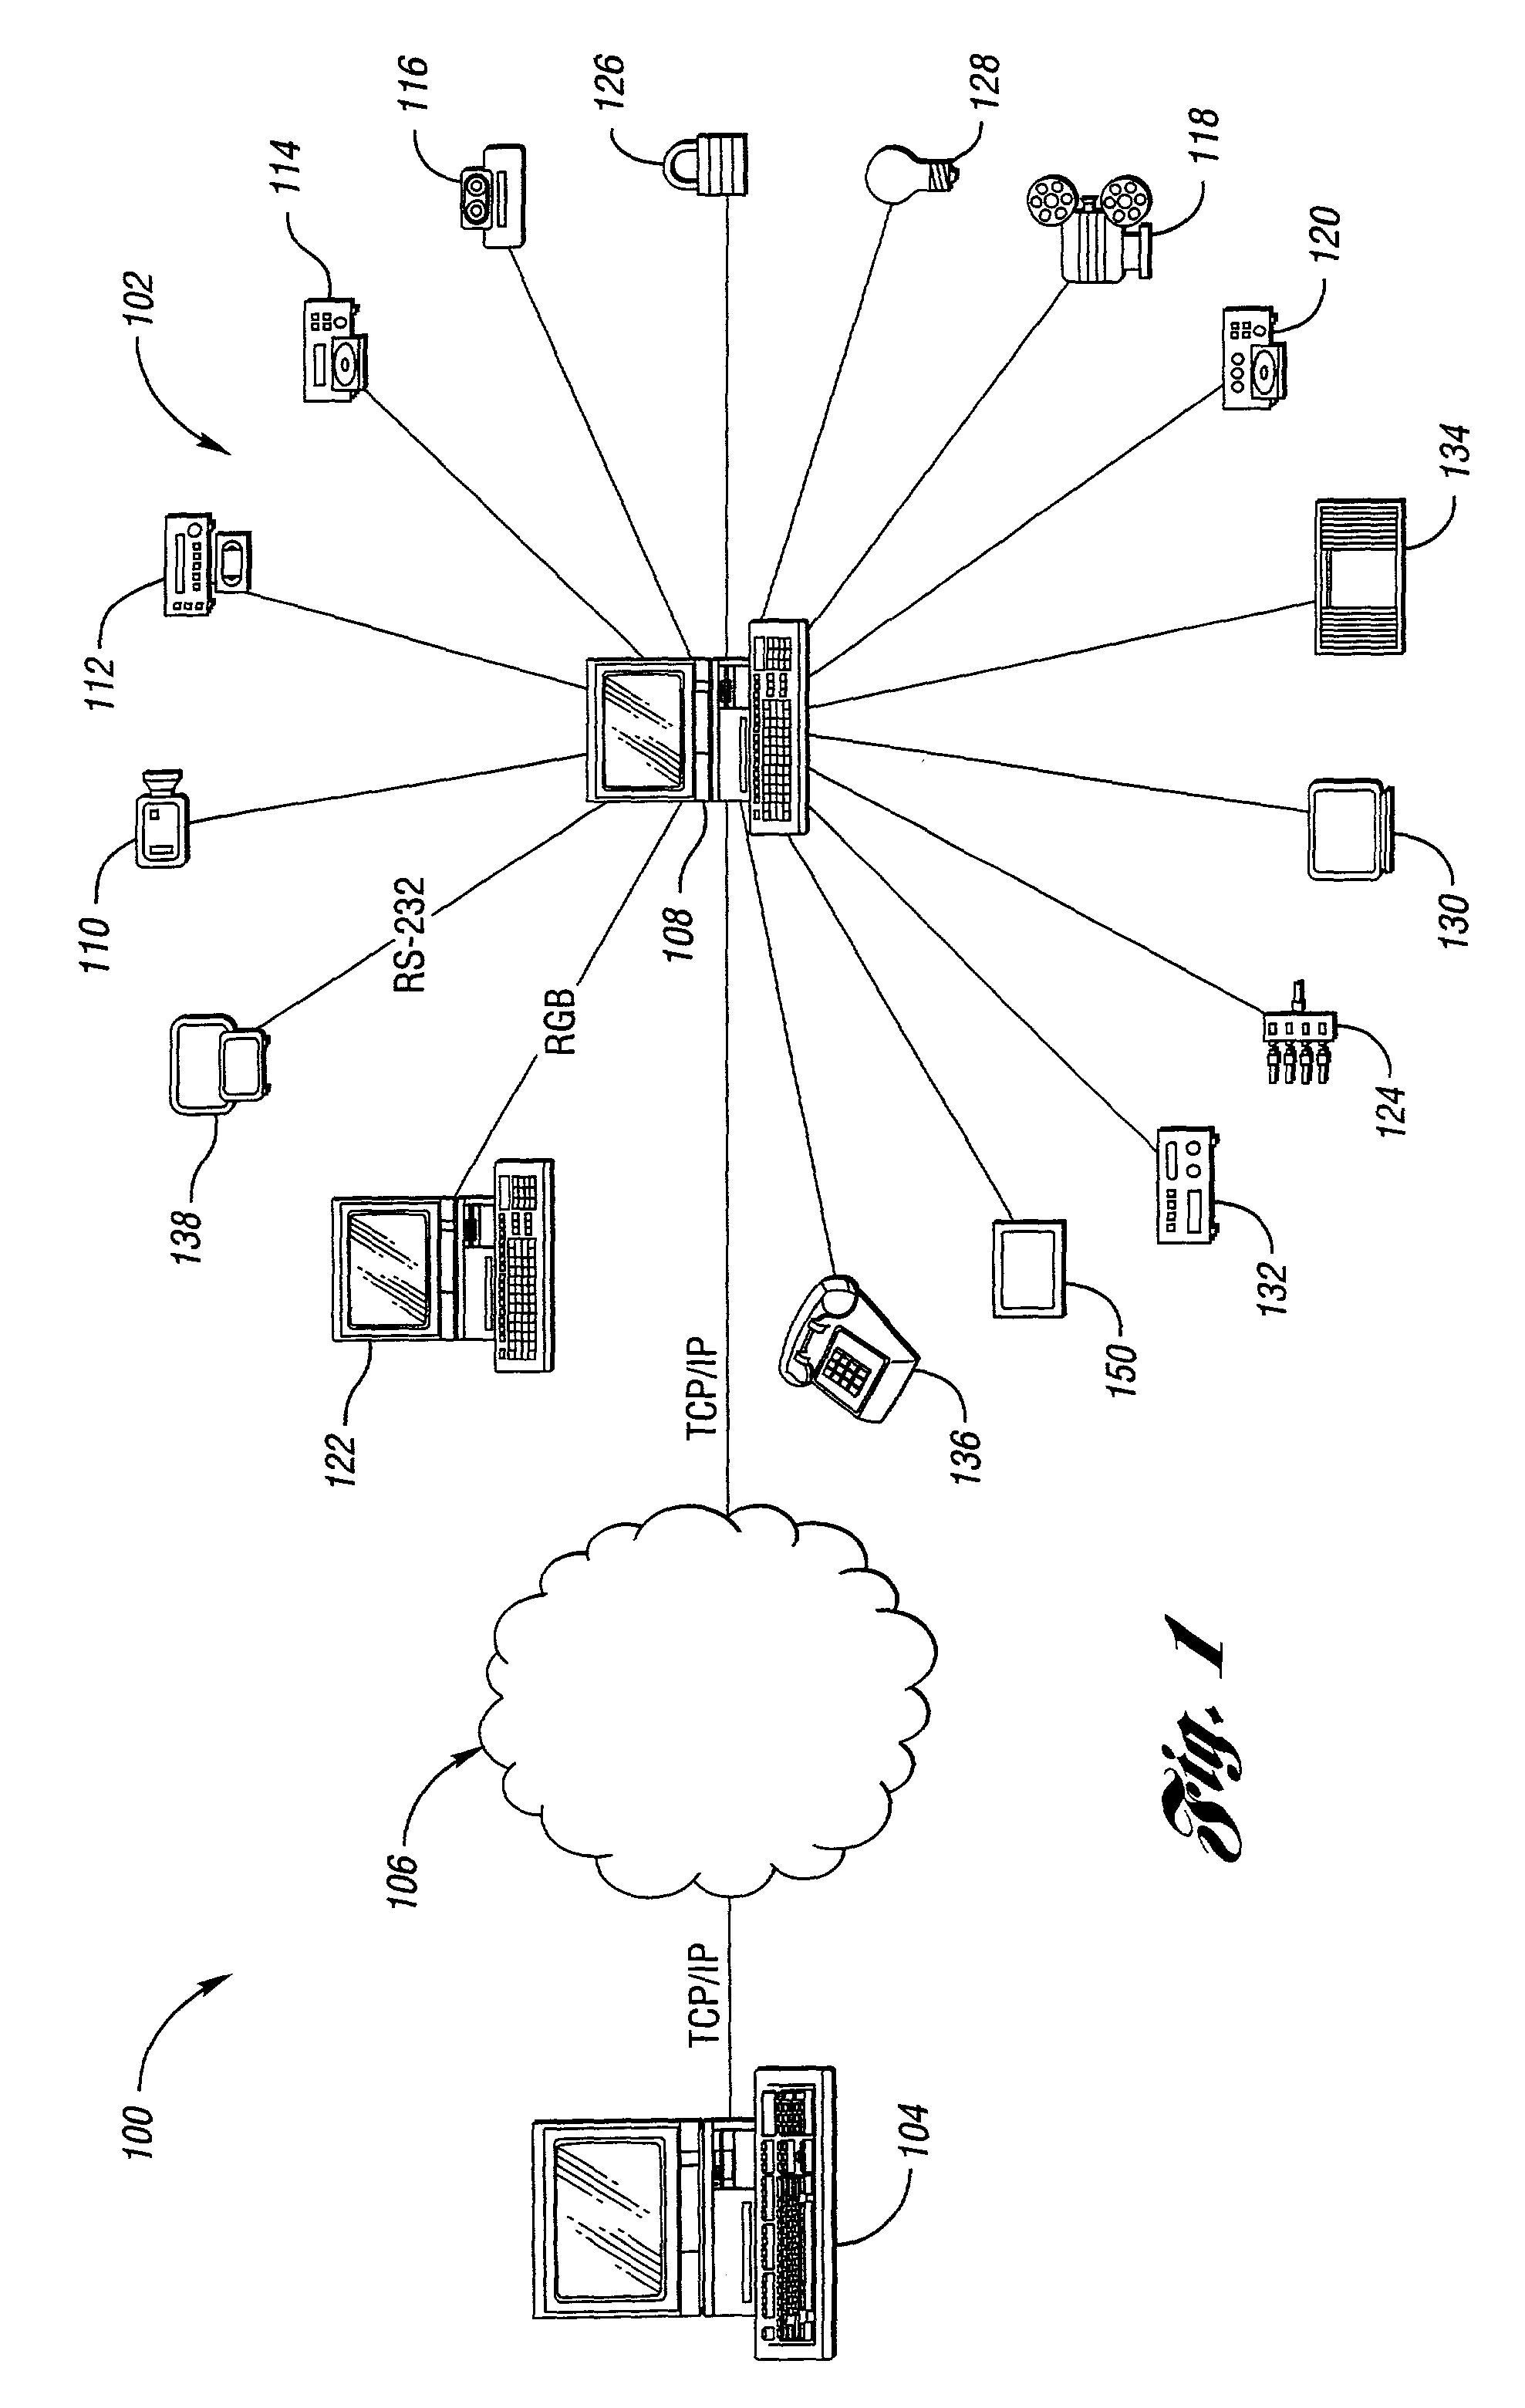 System and method for control of conference facilities and equipment